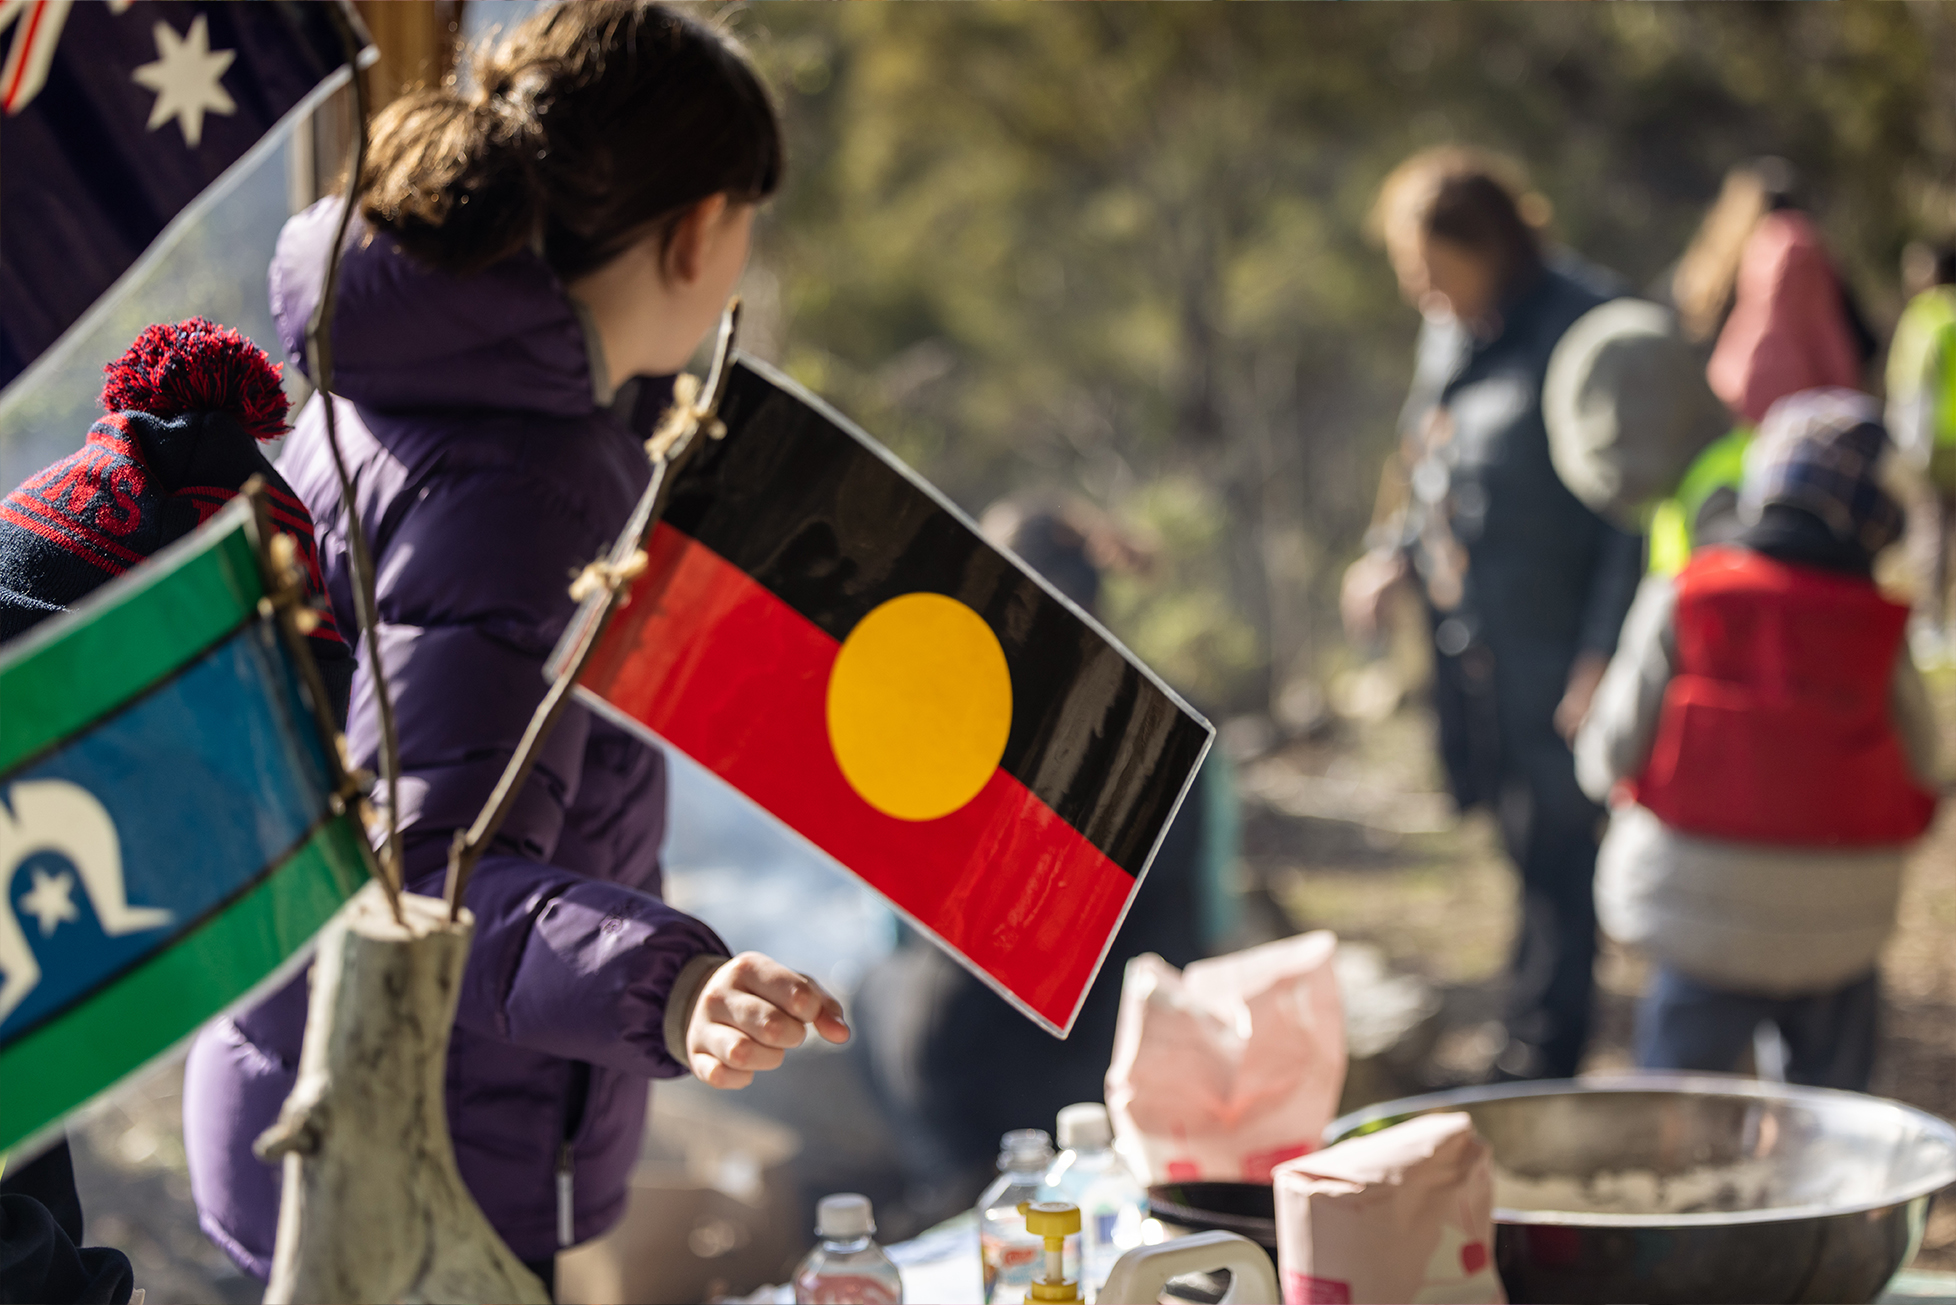 Image of a learning community outside going about activities in the background with the Aboriginal and Torres Strait Flags positioned in the foreground.